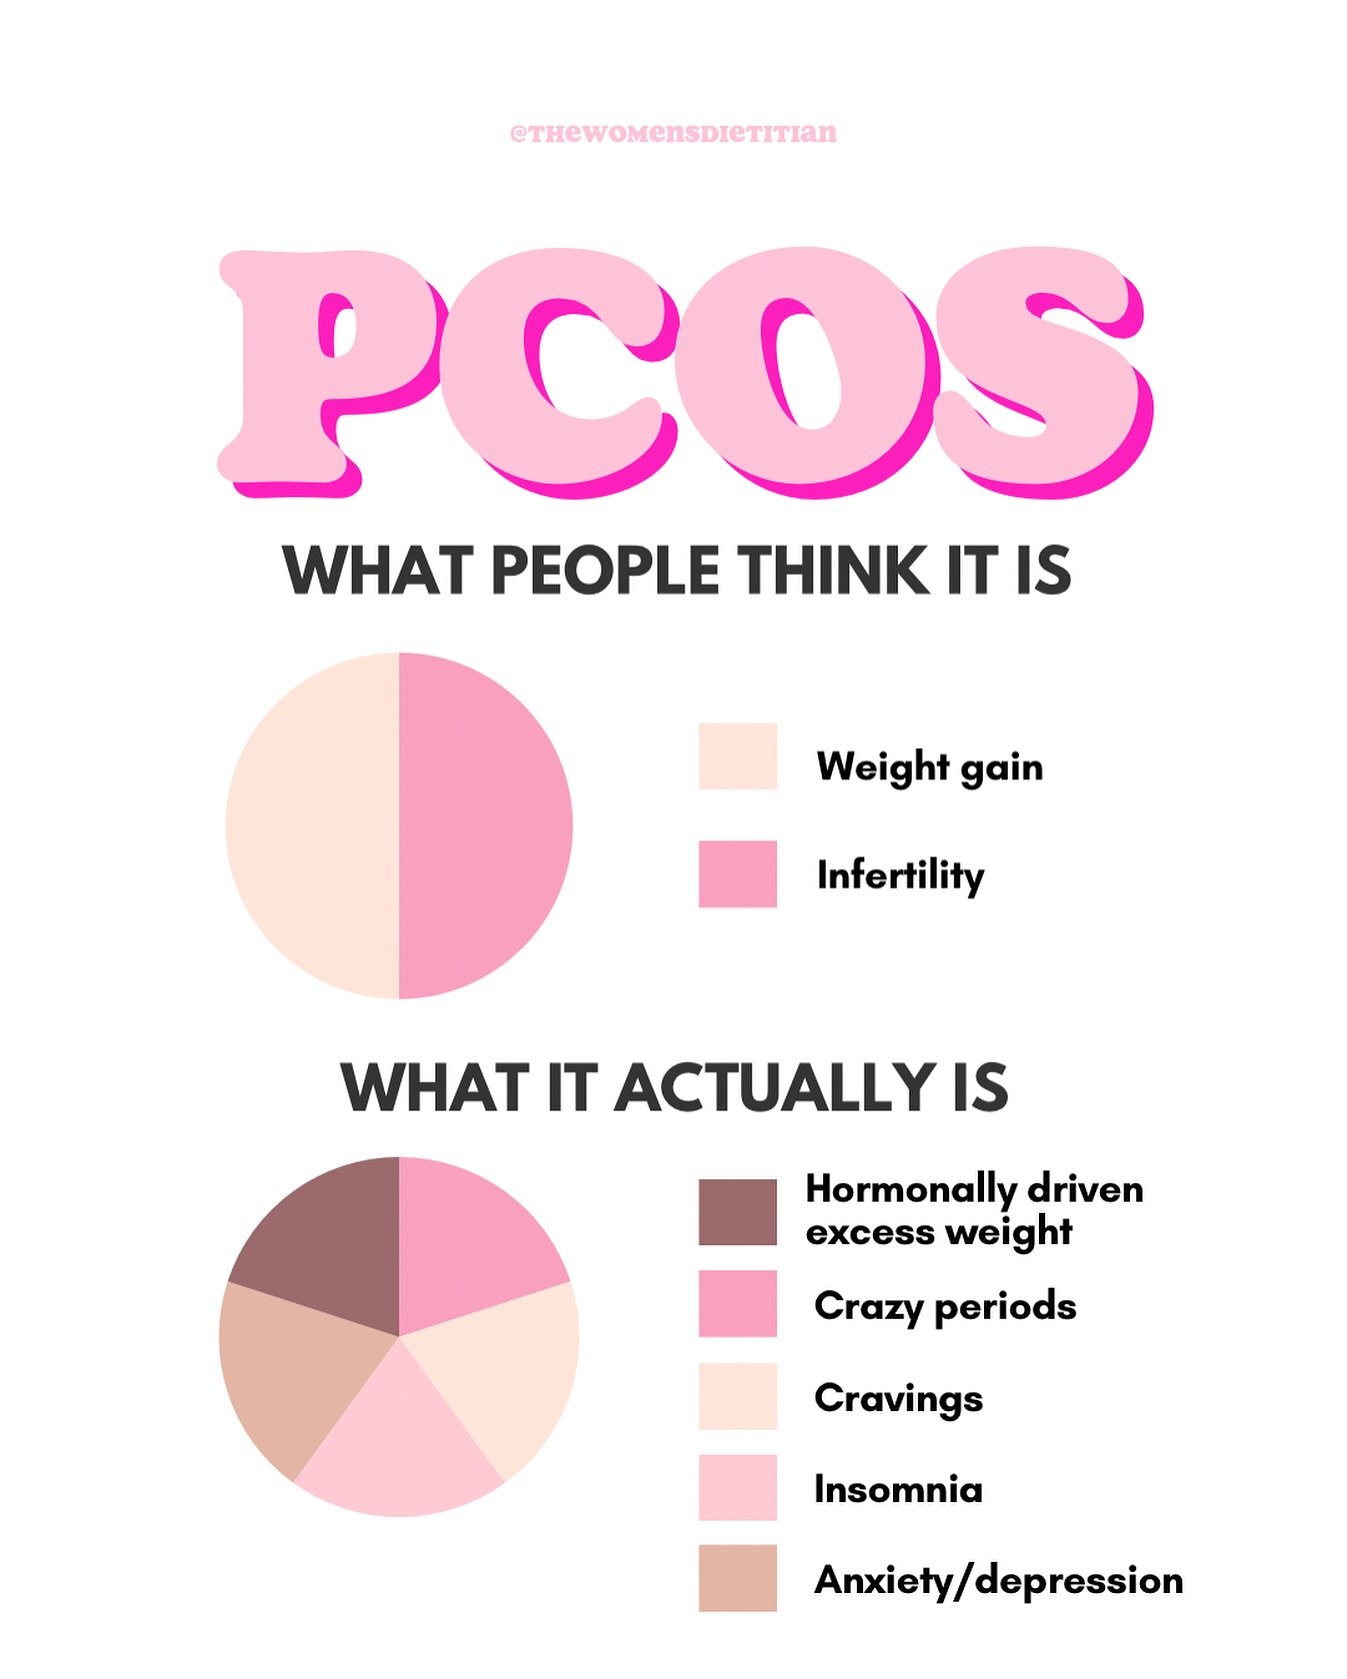 PCOS is NOT a lazy, fat girl condition.

It is so much more than that if only people really knew. Or actually cared.

PCOS can cause/contribute to a whole HOST of really frustrating symptoms like hair loss, dry skin, excess facial and body hair, low 